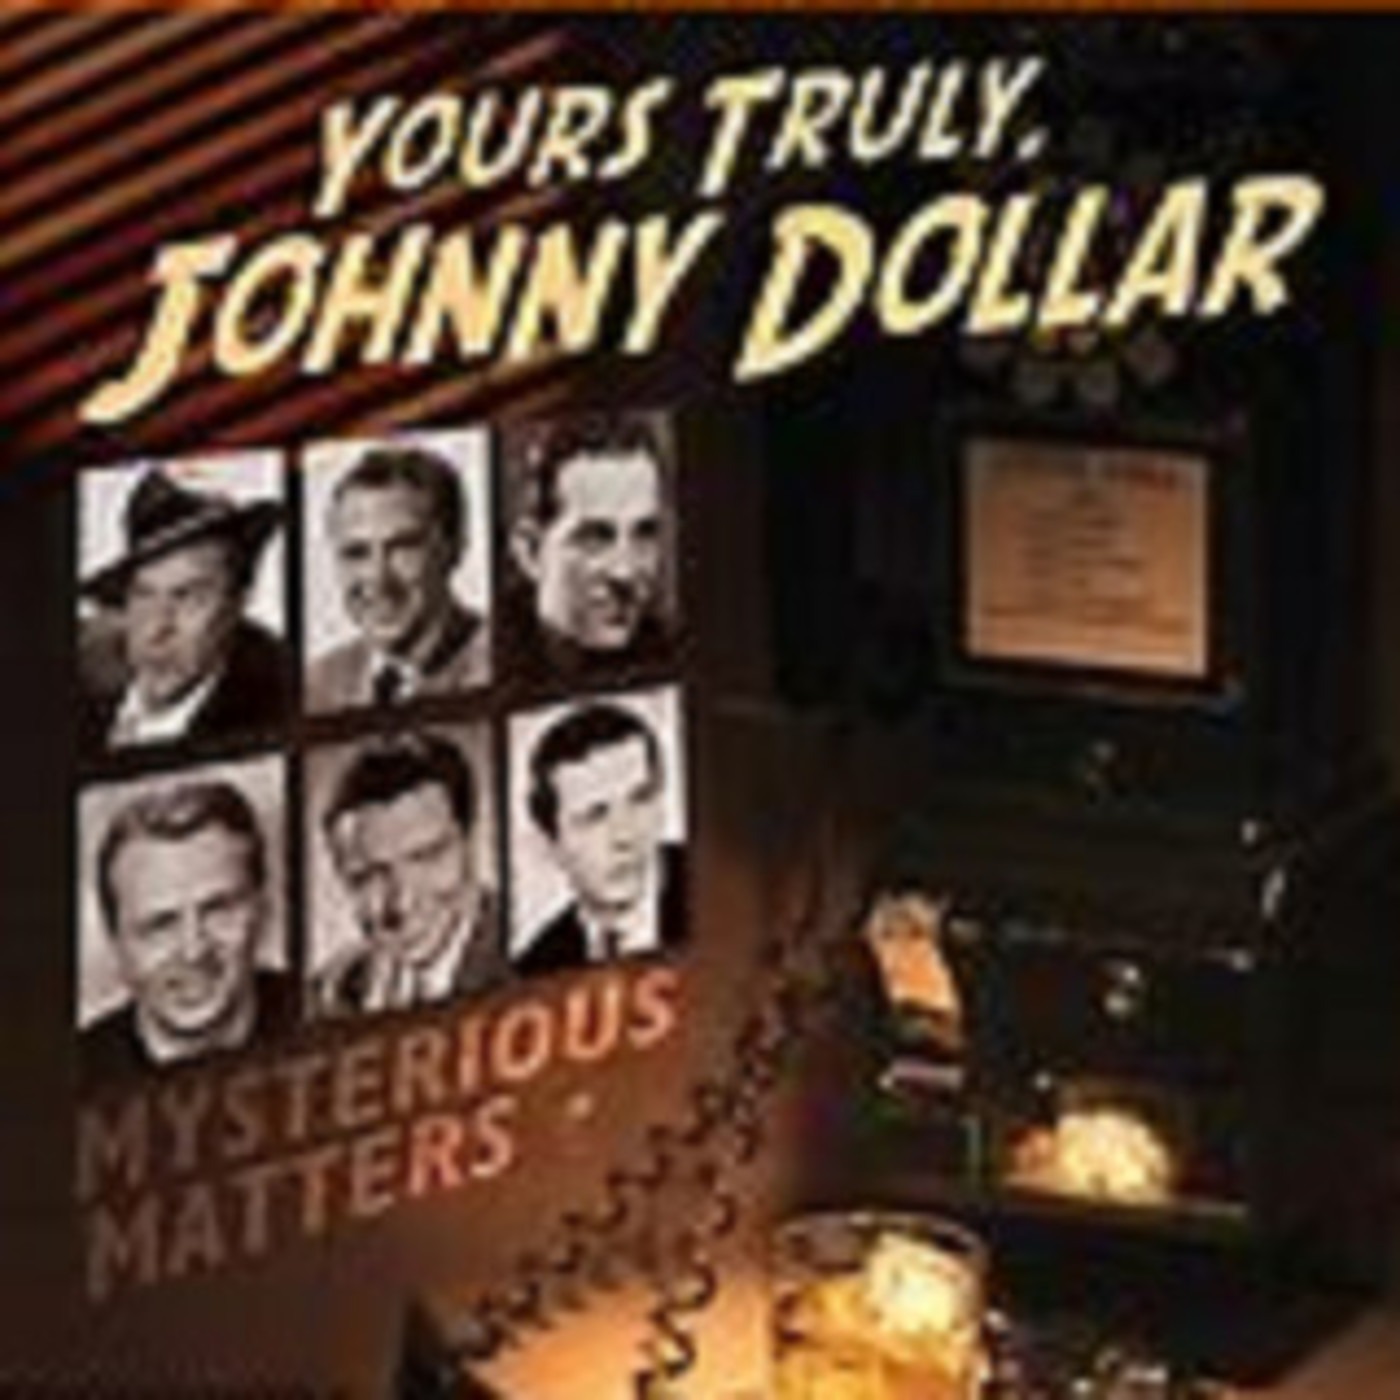 Yours Truly, Johnny Dollar - 093062, episode 811 - The Tip-Off Matter